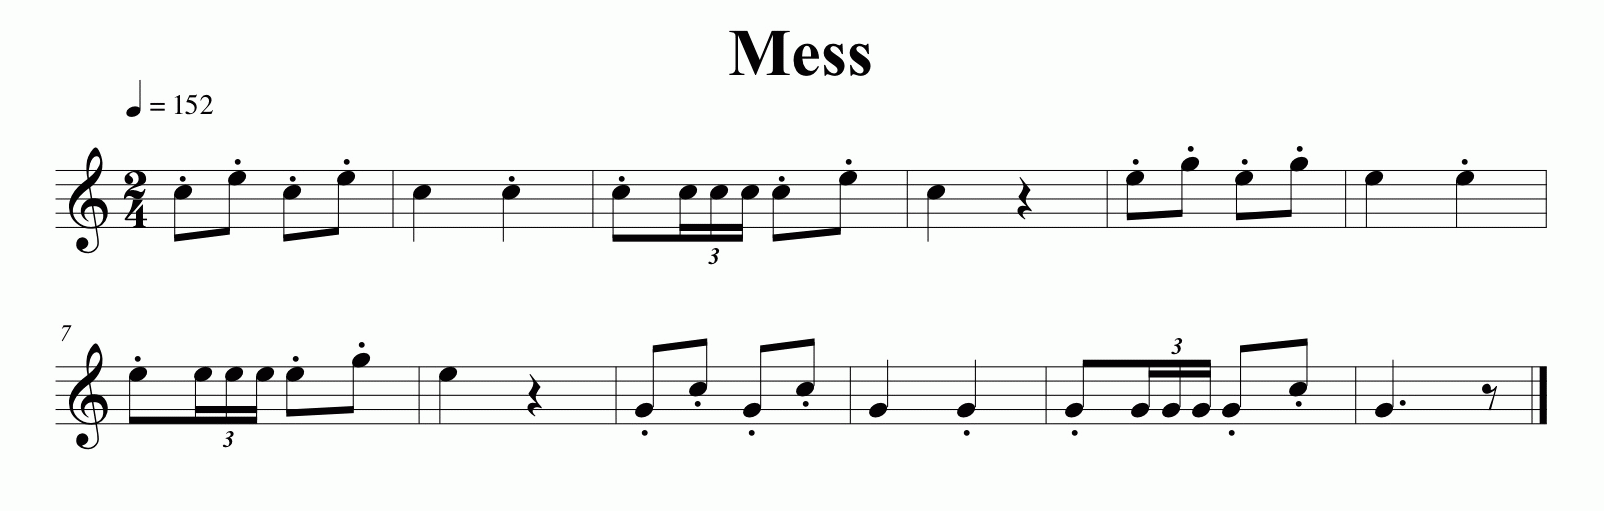 Music for the Mess bugle call